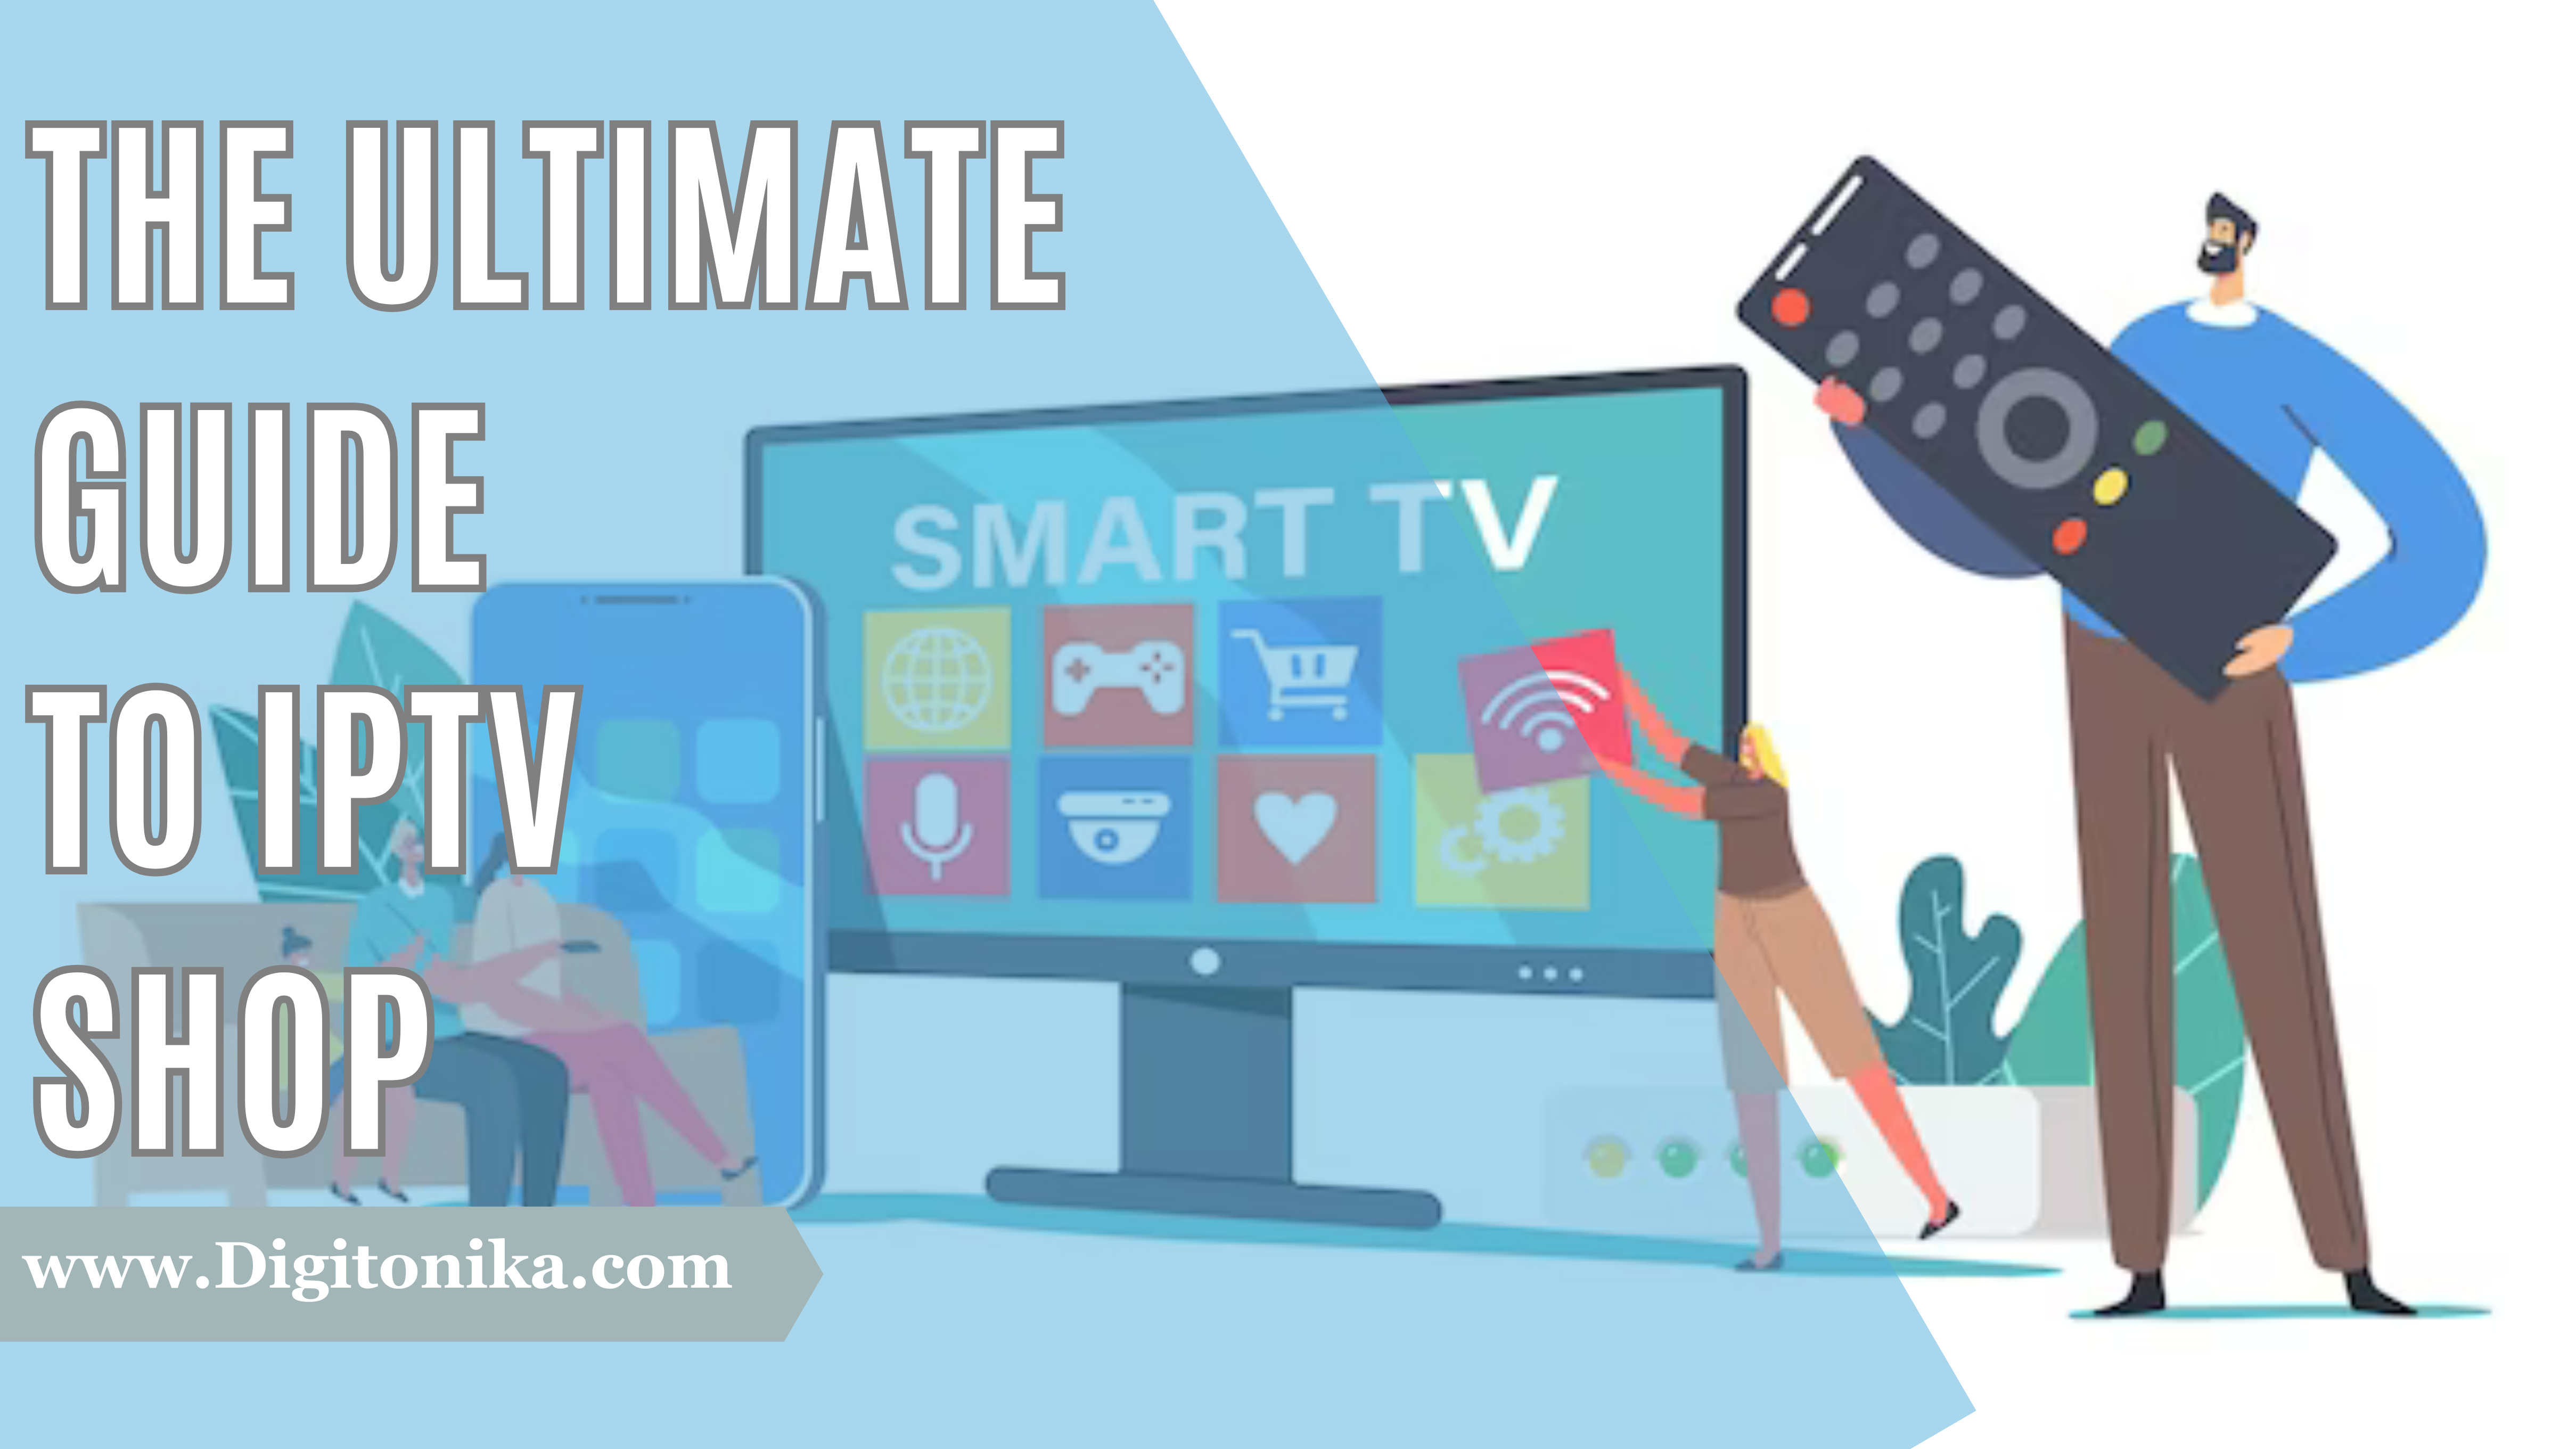 The Ultimate Guide to IPTV Shop: Everything You Need to Know